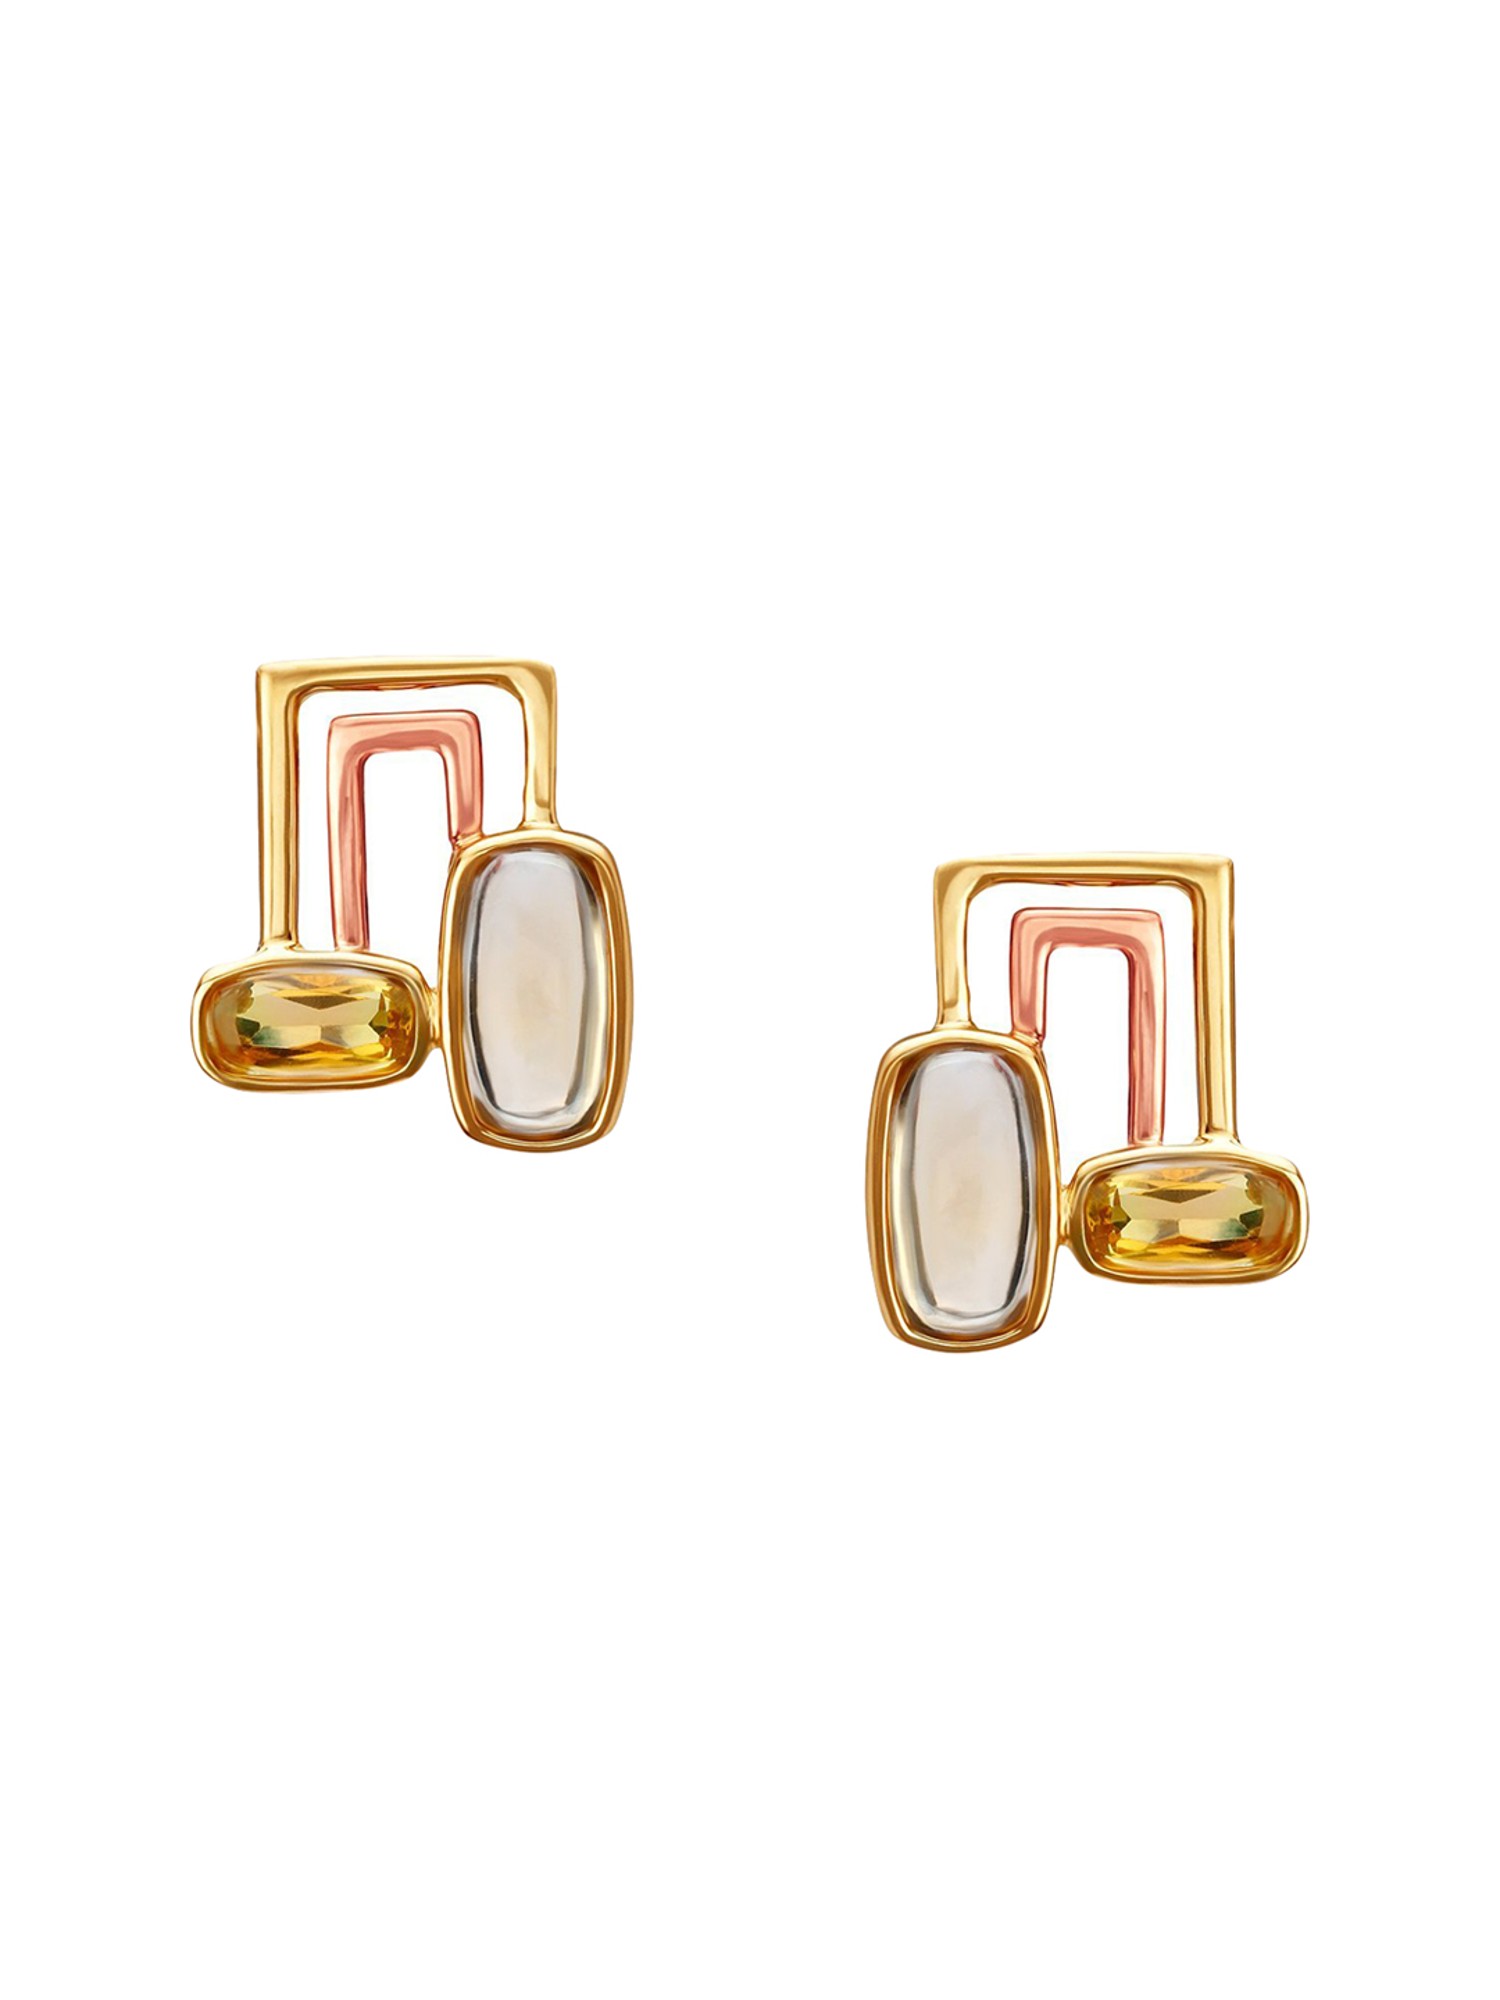 Buy Mia by TANISHQ by Tanishq 14KT Yellow Gold Diamond Stud Earrings with  Oval Design Online - Best Price Mia by TANISHQ by Tanishq 14KT Yellow Gold  Diamond Stud Earrings with Oval